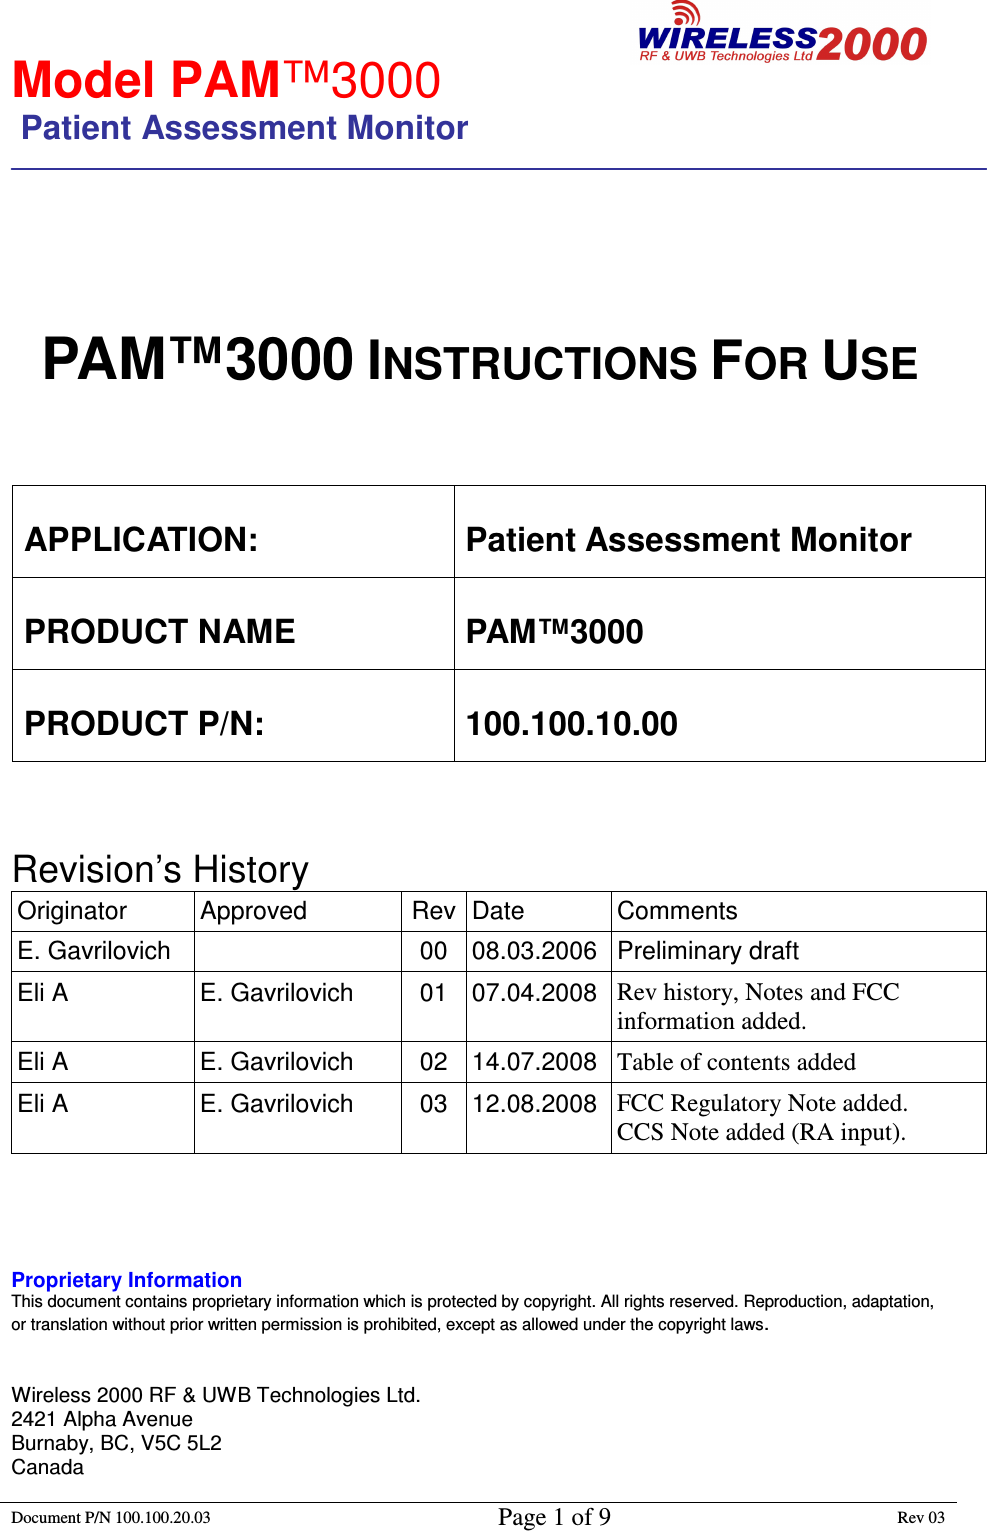                                                        Model PAM™3000                 Patient Assessment Monitor                                                                        Document P/N 100.100.20.03 Page 1 of 9 Rev 03                                                                                                                                             PAM™3000 INSTRUCTIONS FOR USE    APPLICATION:  Patient Assessment Monitor PRODUCT NAME  PAM™3000 PRODUCT P/N:  100.100.10.00    Revision’s History  Originator  Approved  Rev Date  Comments E. Gavrilovich    00  08.03.2006  Preliminary draft Eli A  E. Gavrilovich  01  07.04.2008 Rev history, Notes and FCC information added. Eli A  E. Gavrilovich  02  14.07.2008 Table of contents added Eli A  E. Gavrilovich  03  12.08.2008 FCC Regulatory Note added. CCS Note added (RA input).     Proprietary Information This document contains proprietary information which is protected by copyright. All rights reserved. Reproduction, adaptation, or translation without prior written permission is prohibited, except as allowed under the copyright laws.   Wireless 2000 RF &amp; UWB Technologies Ltd.                          2421 Alpha Avenue                                                                 Burnaby, BC, V5C 5L2 Canada 